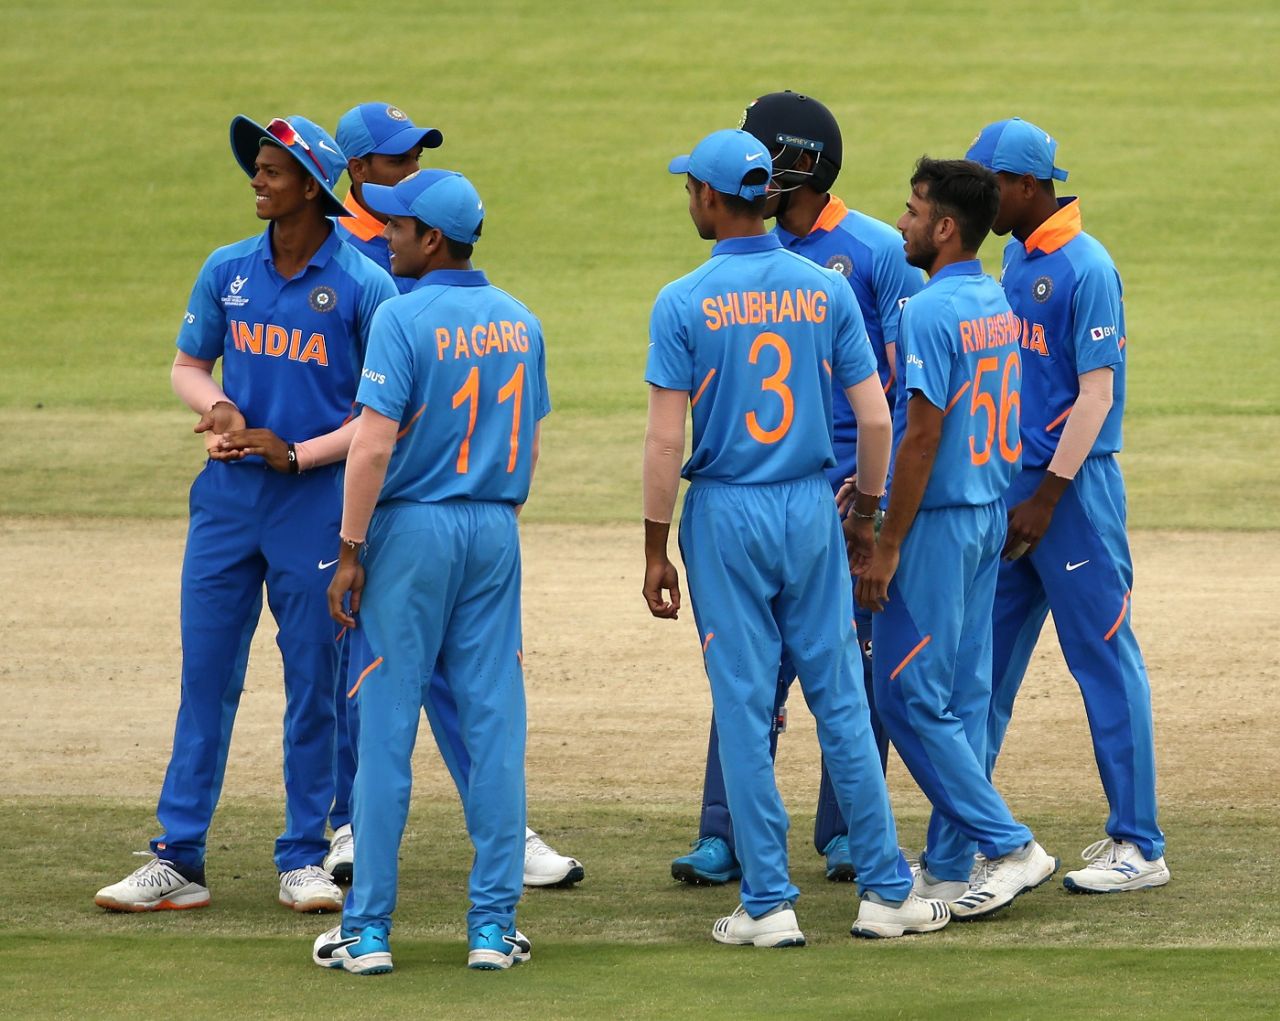 Ravi Bishnoi picked two wickets in an over twice, India v Japan, Under-19 World Cup 2020, Bloemfontein, January 21, 2020